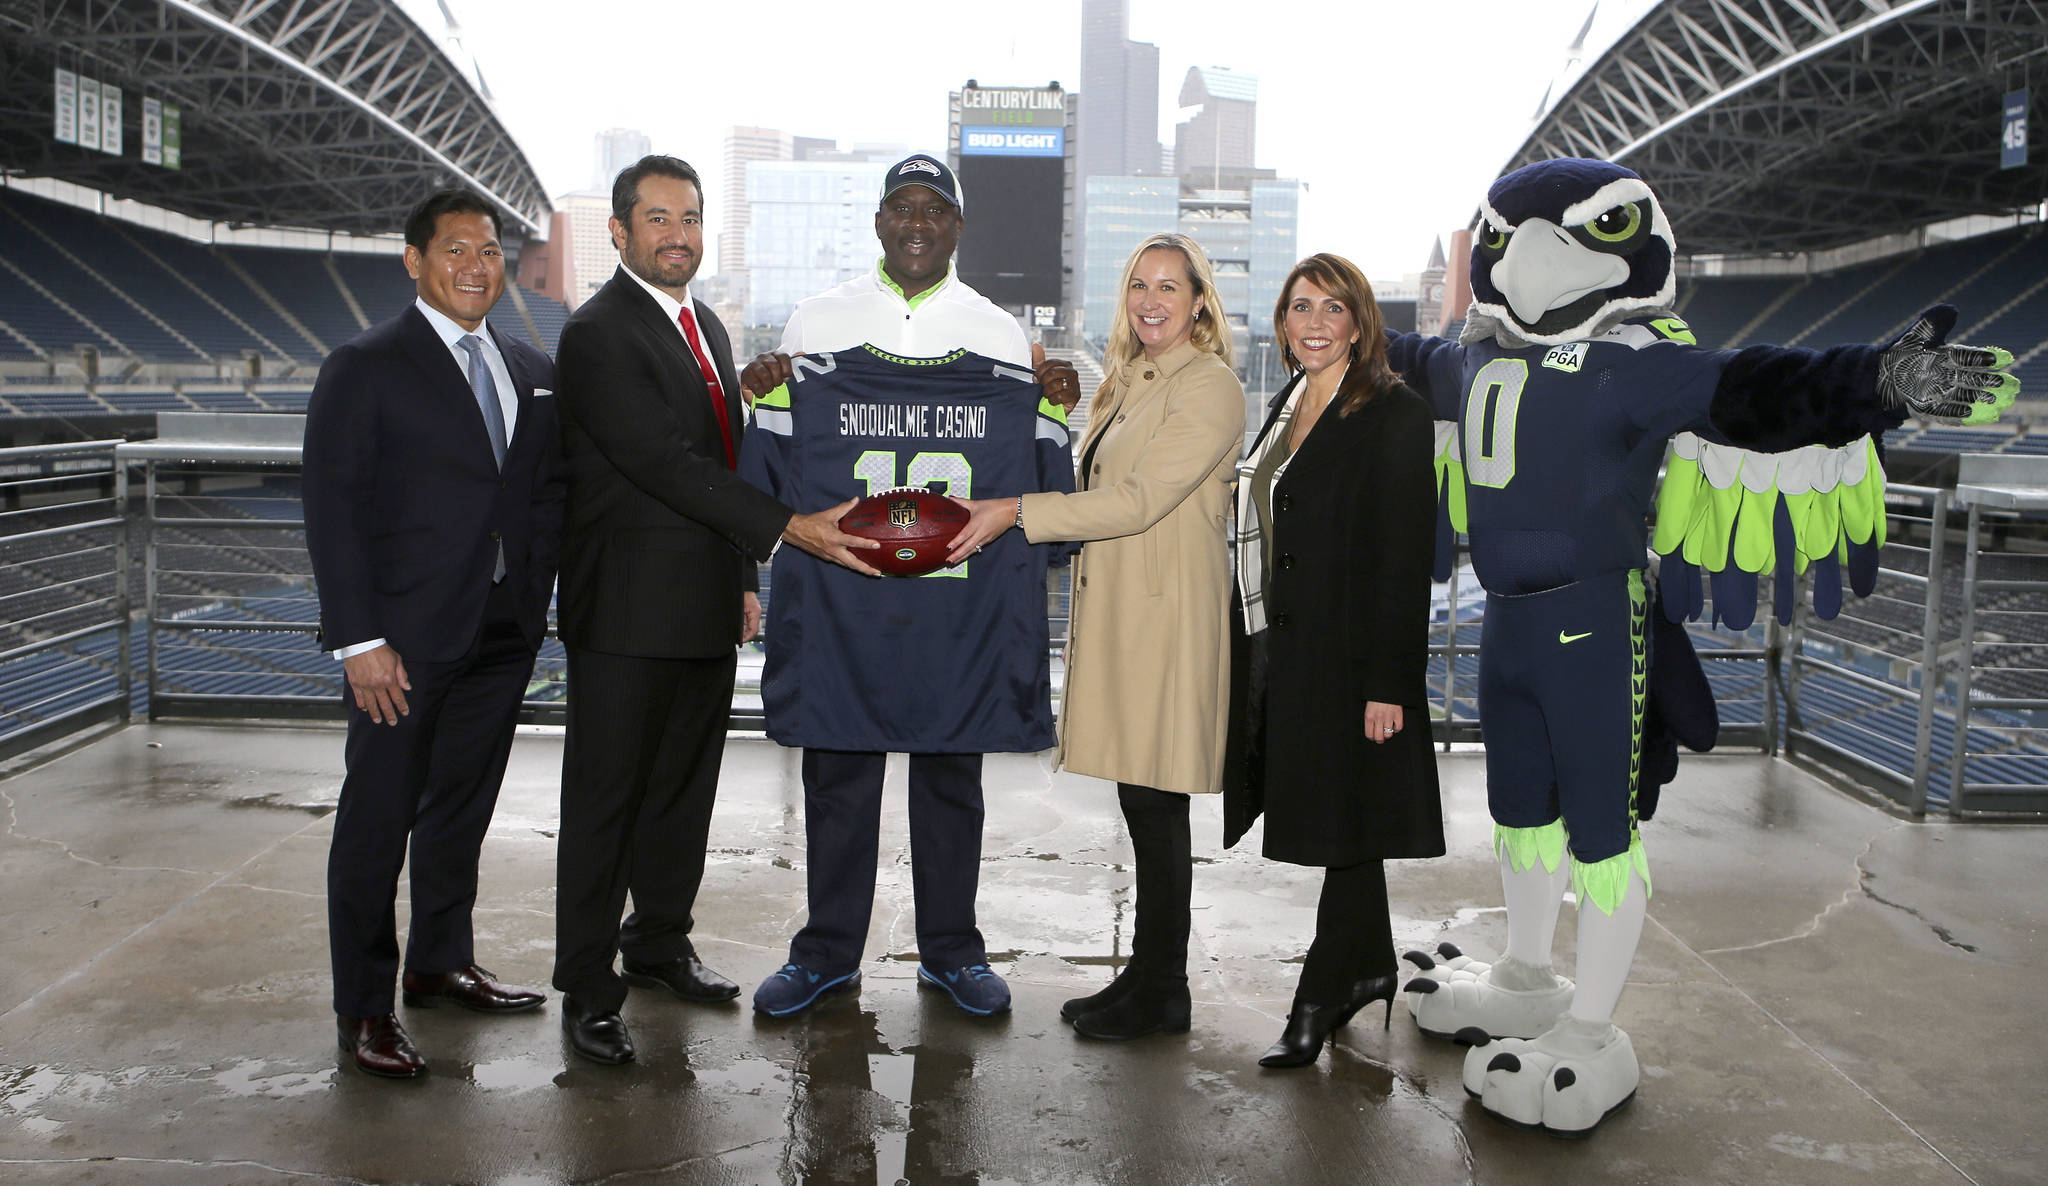 Snoqualmie Casino and the Seattle Seahawks officially form advertising partnership. From left: Casino chief marketing officer Stanford Le, Casino CEO Brian Decorah, former Seahawks player Randall Morris, Seahawks senior VP of revenue Amy Sprangers, and director of sales and corporate partnerships Gina Martinez Todd. Courtesy Photo